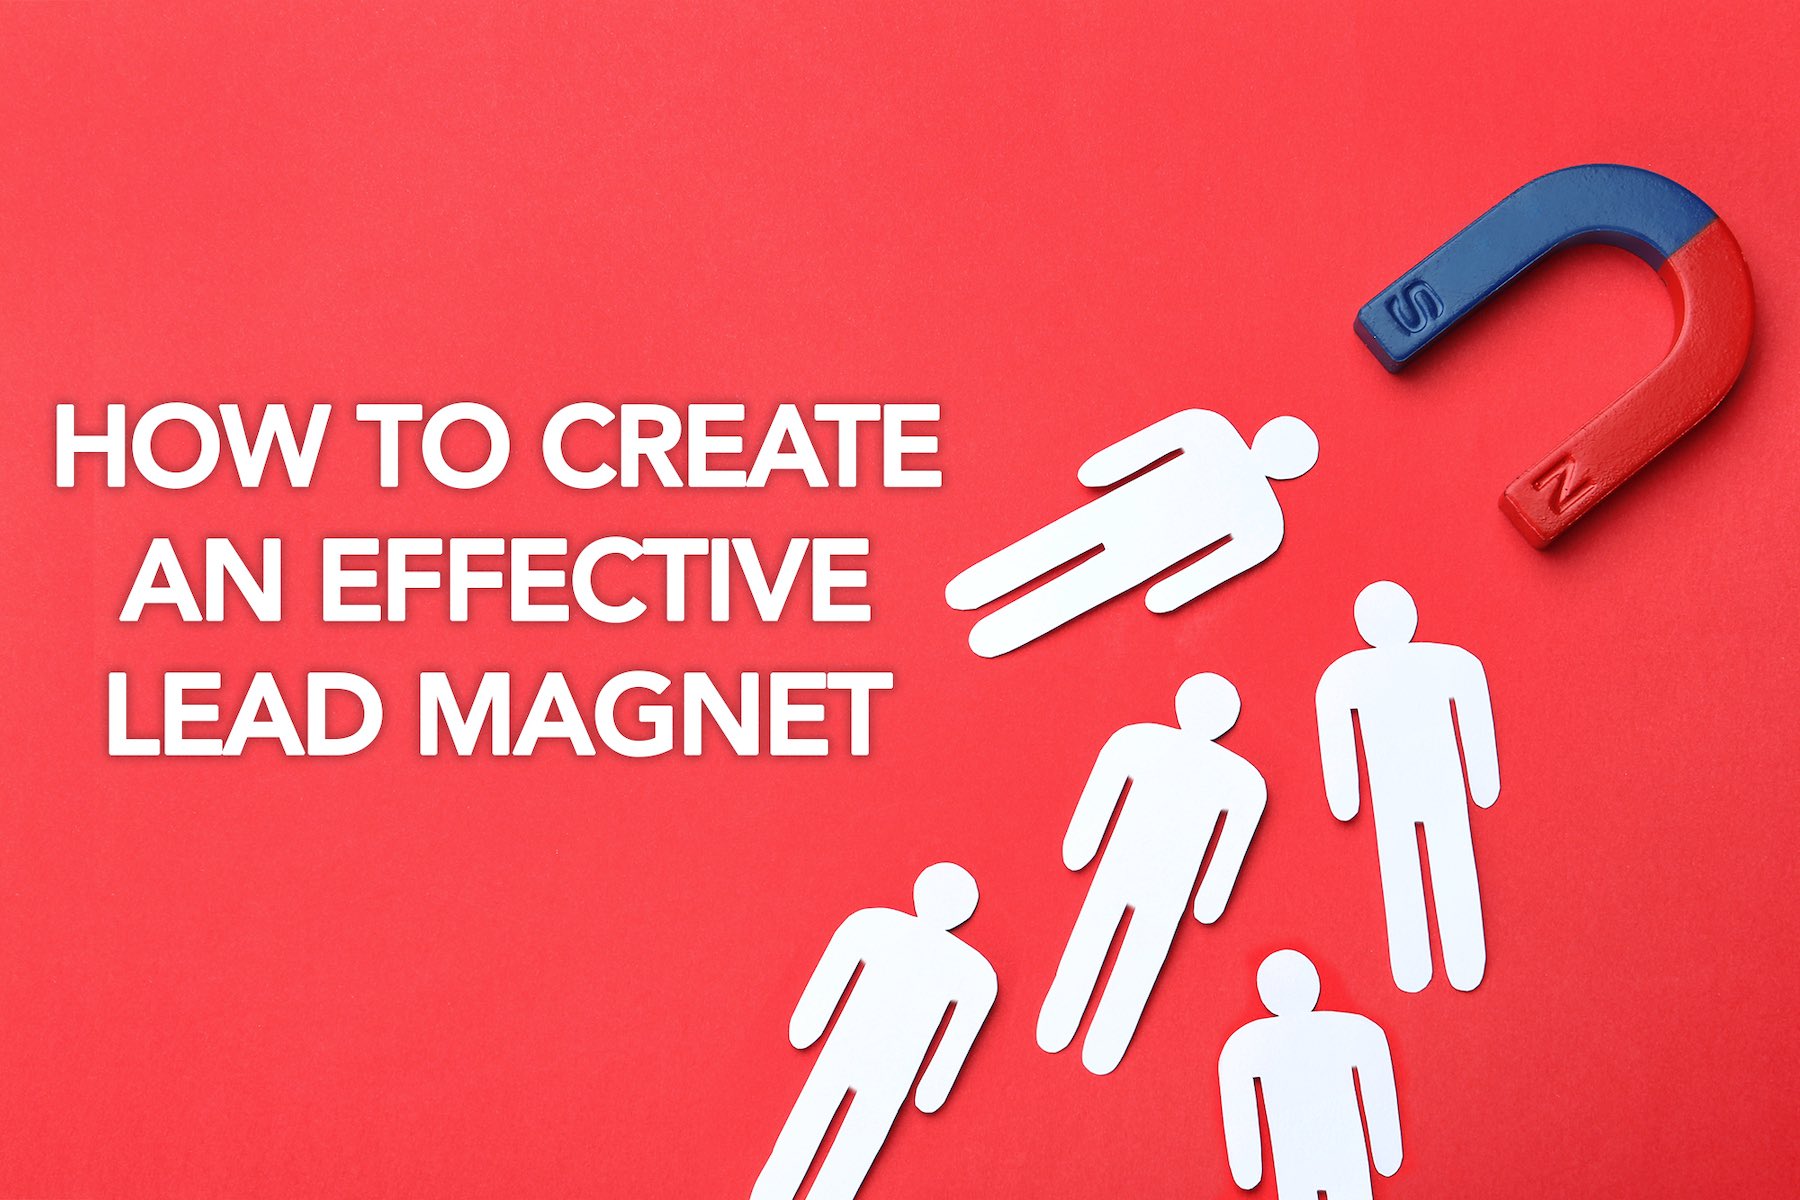 How To Create An Effective Lead Magnet